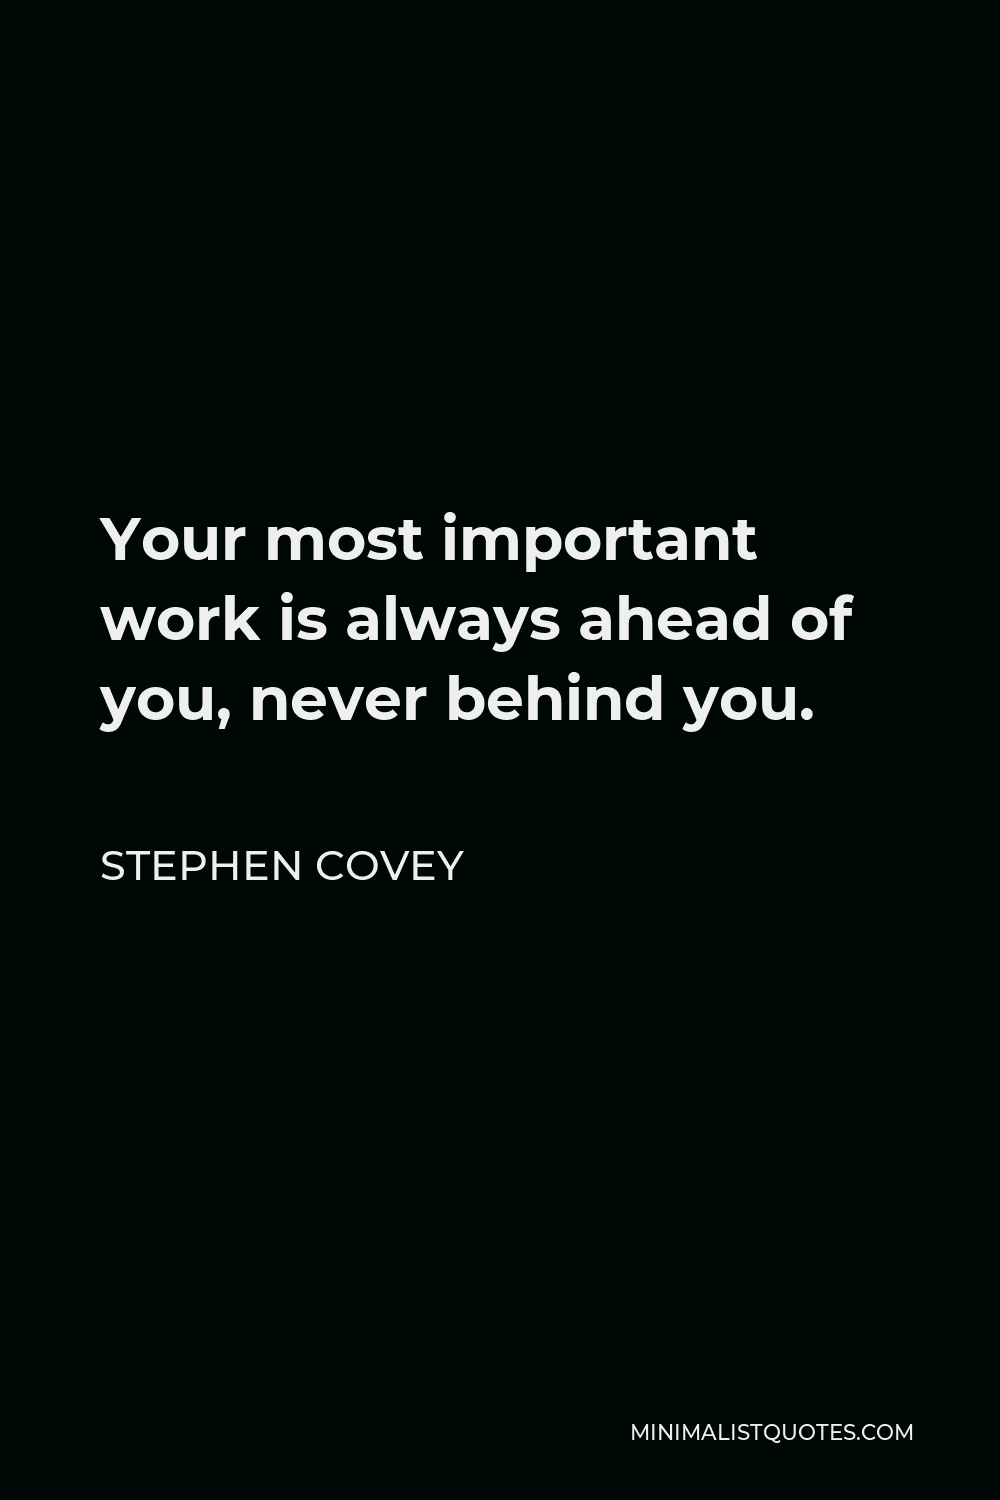 Stephen Covey Quote - Your most important work is always ahead of you, never behind you.